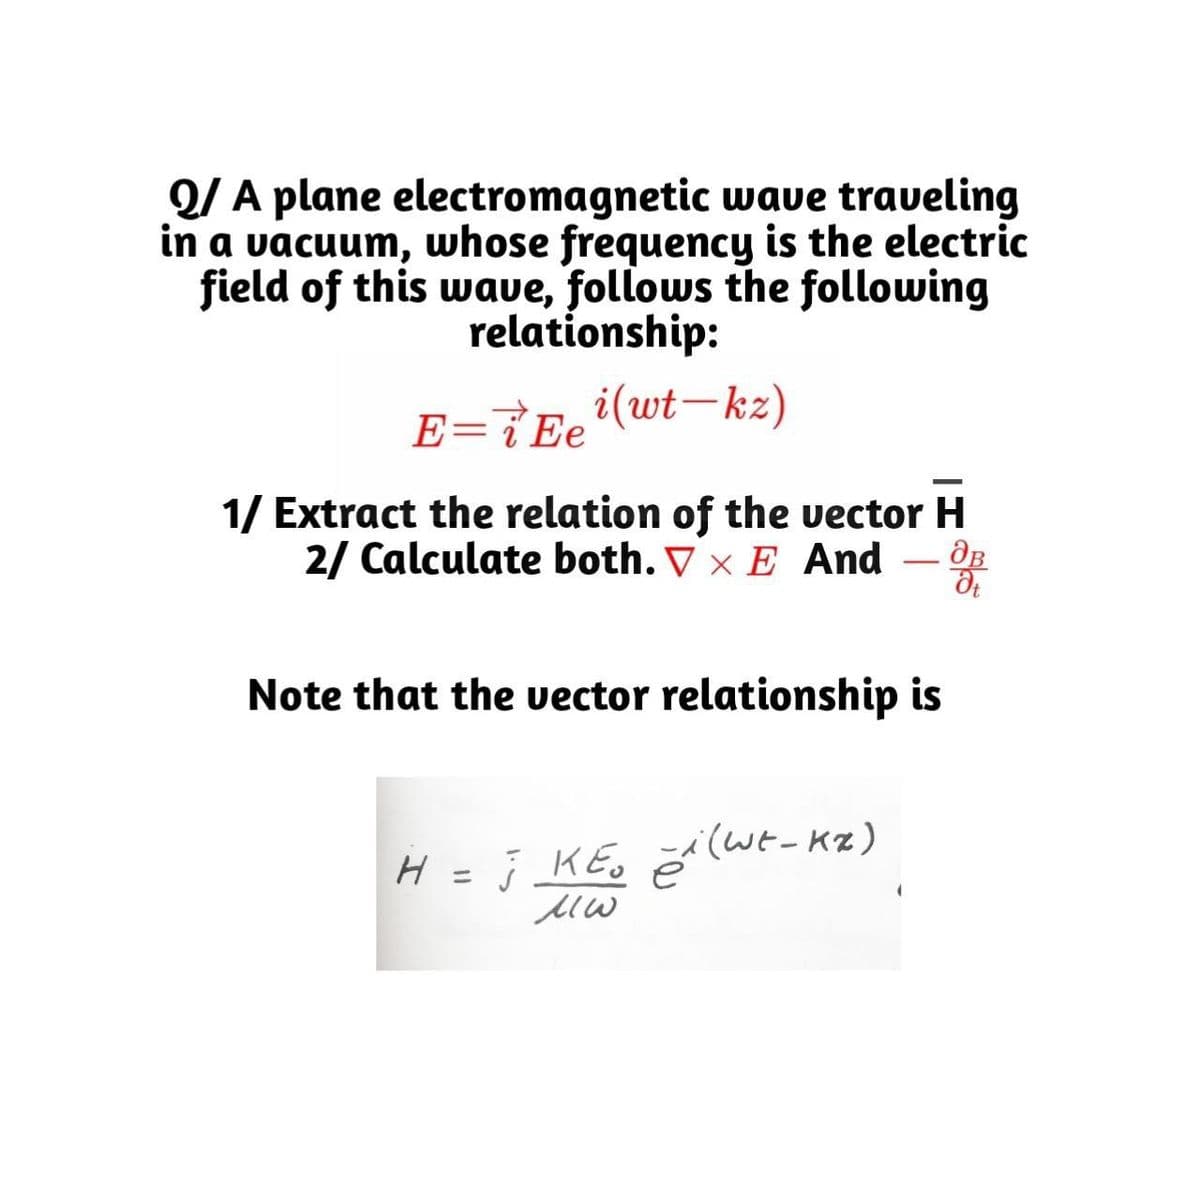 Q/ A plane electromagnetic wave traveling
in a vacuum, whose frequency is the electric
field of this waue, follows the following
relationship:
i(wt–kz)
E=i Ee
1/ Extract the relation of the vector H
2/ Calculate both. ▼ × E And
-
Note that the vector relationship is
H = j KE, ĕil(wt-Kz)
ニ
